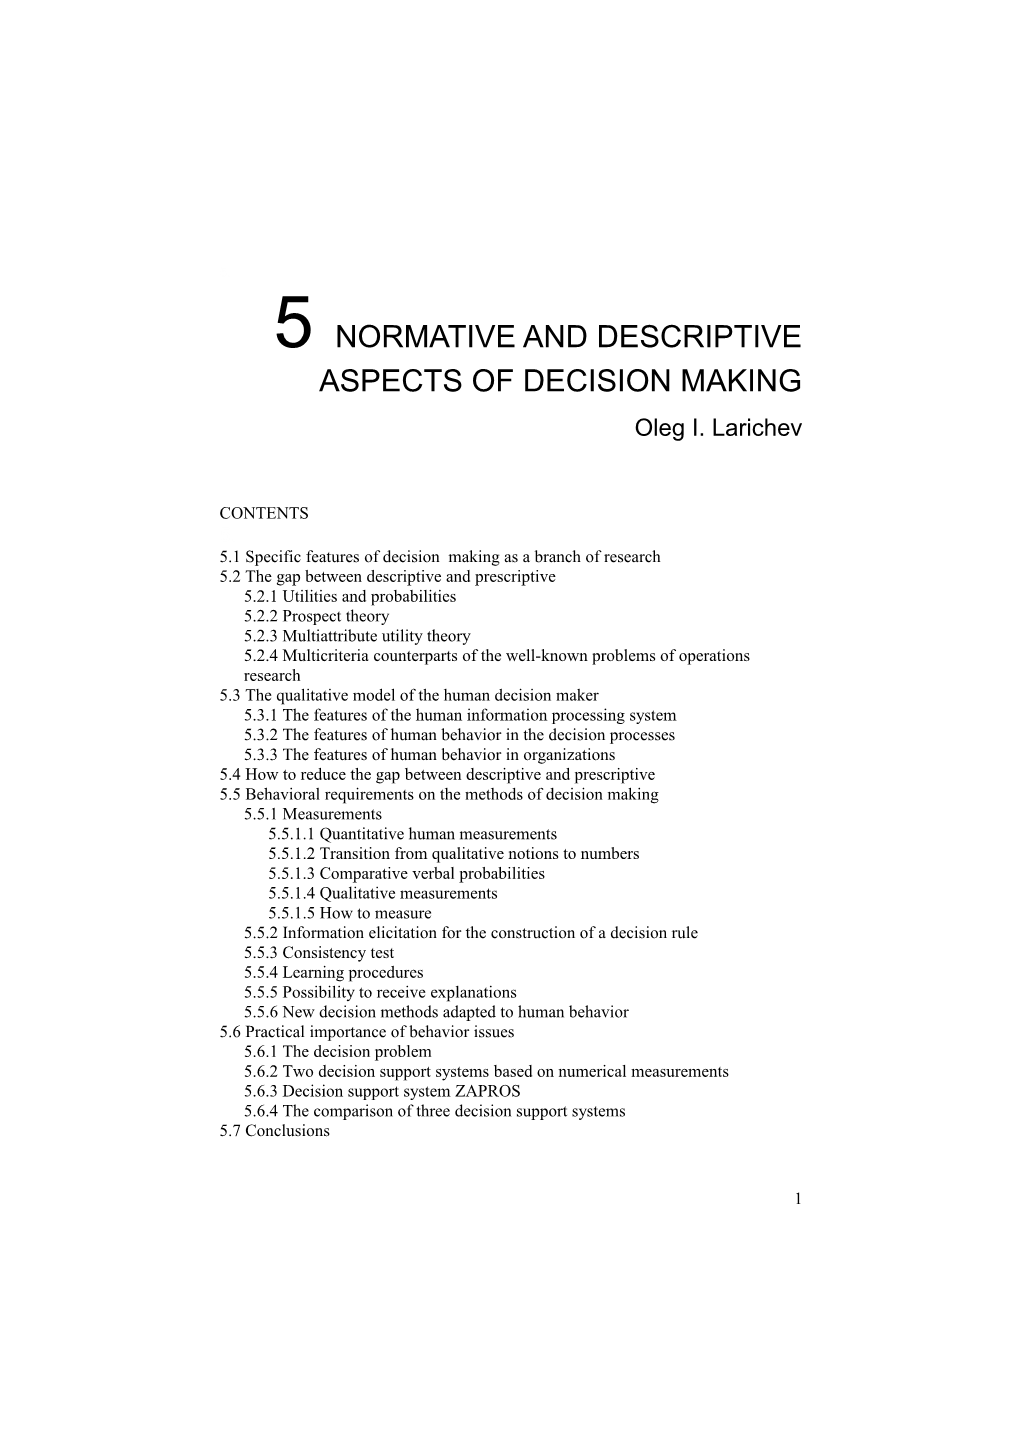 Normative and Descriptive Aspects of Decision Making